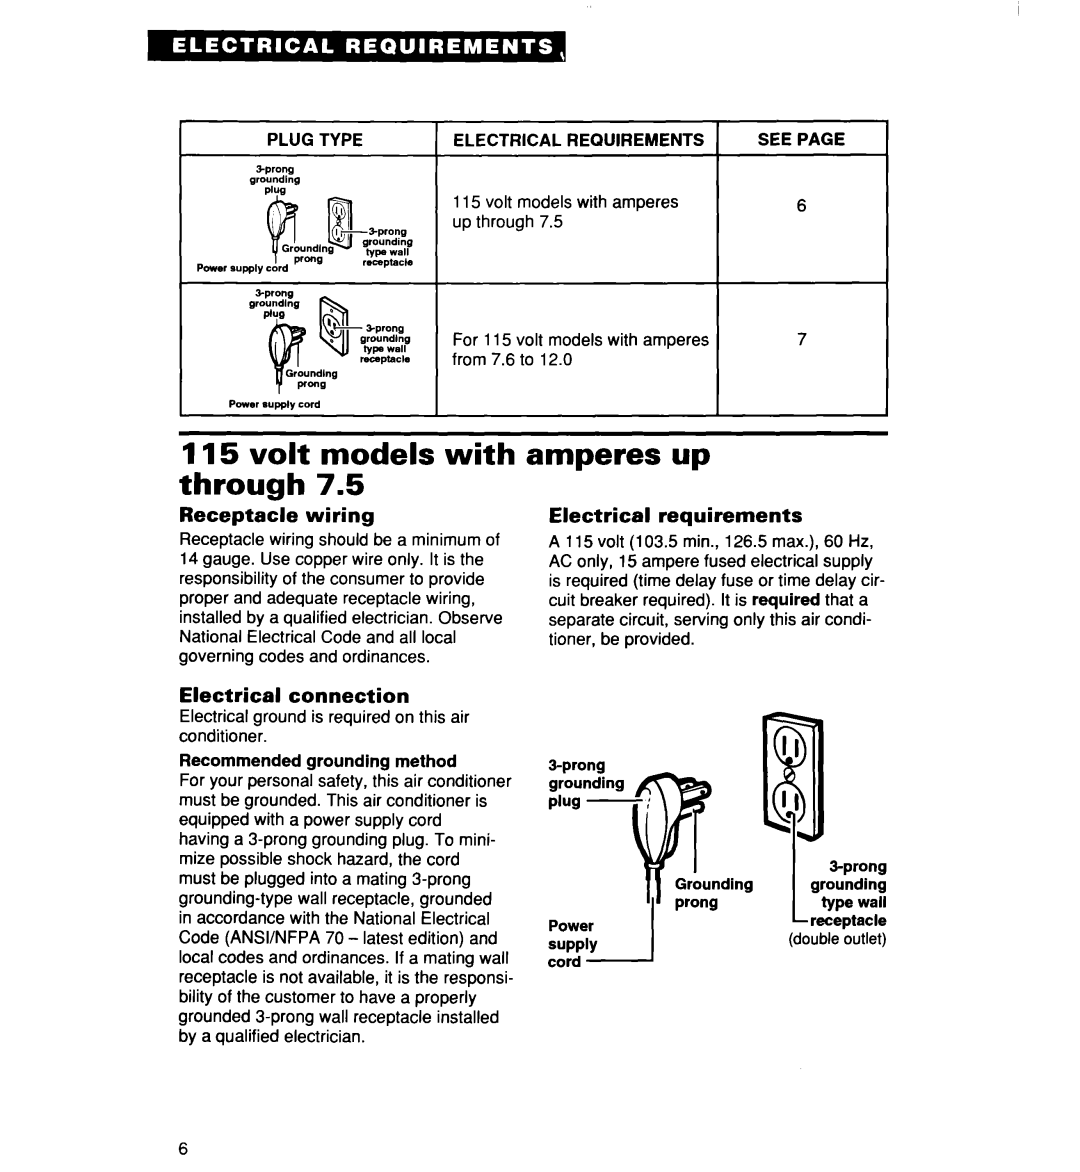 Whirlpool ACS072XE volt models with through, amperes up, Receptacle wiring, Electrical connection, Electrical requirements 